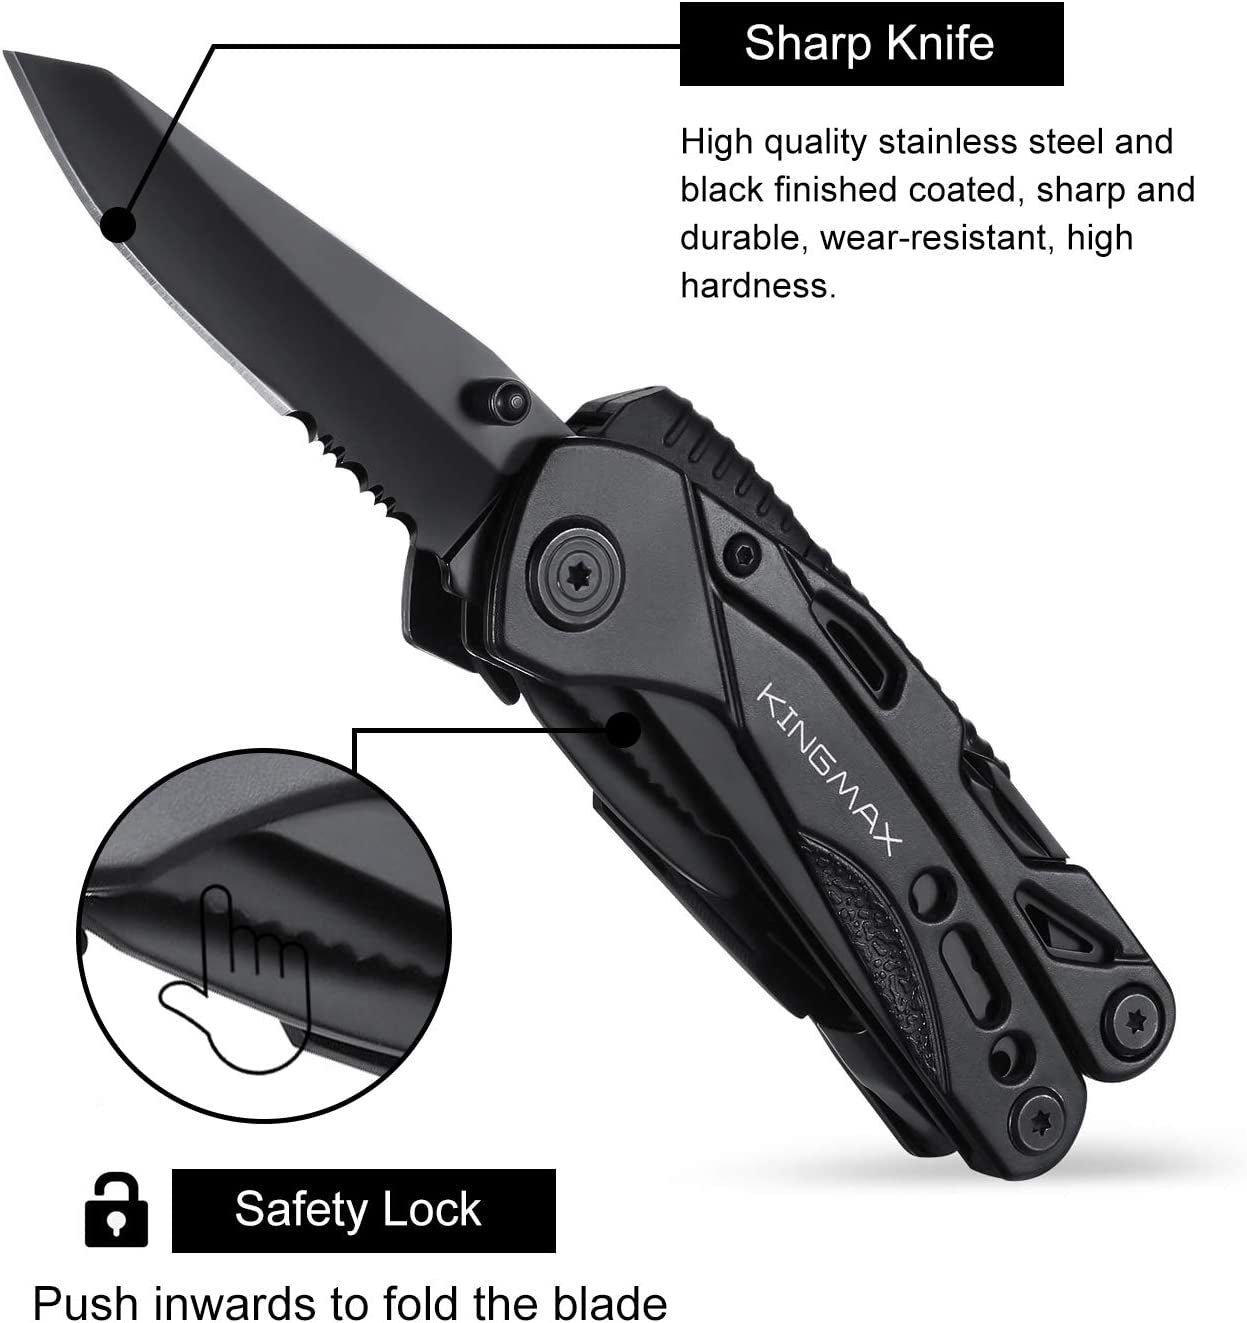 Multitool with Pliers, Fire Starter, Whistle,Scissors,Screwdriver,15 in 1 EDC Multi Tool with Safety Locking,Perfect Survival Knife Tool Gifts for Men Women,Outdoor,Camping,Fishing